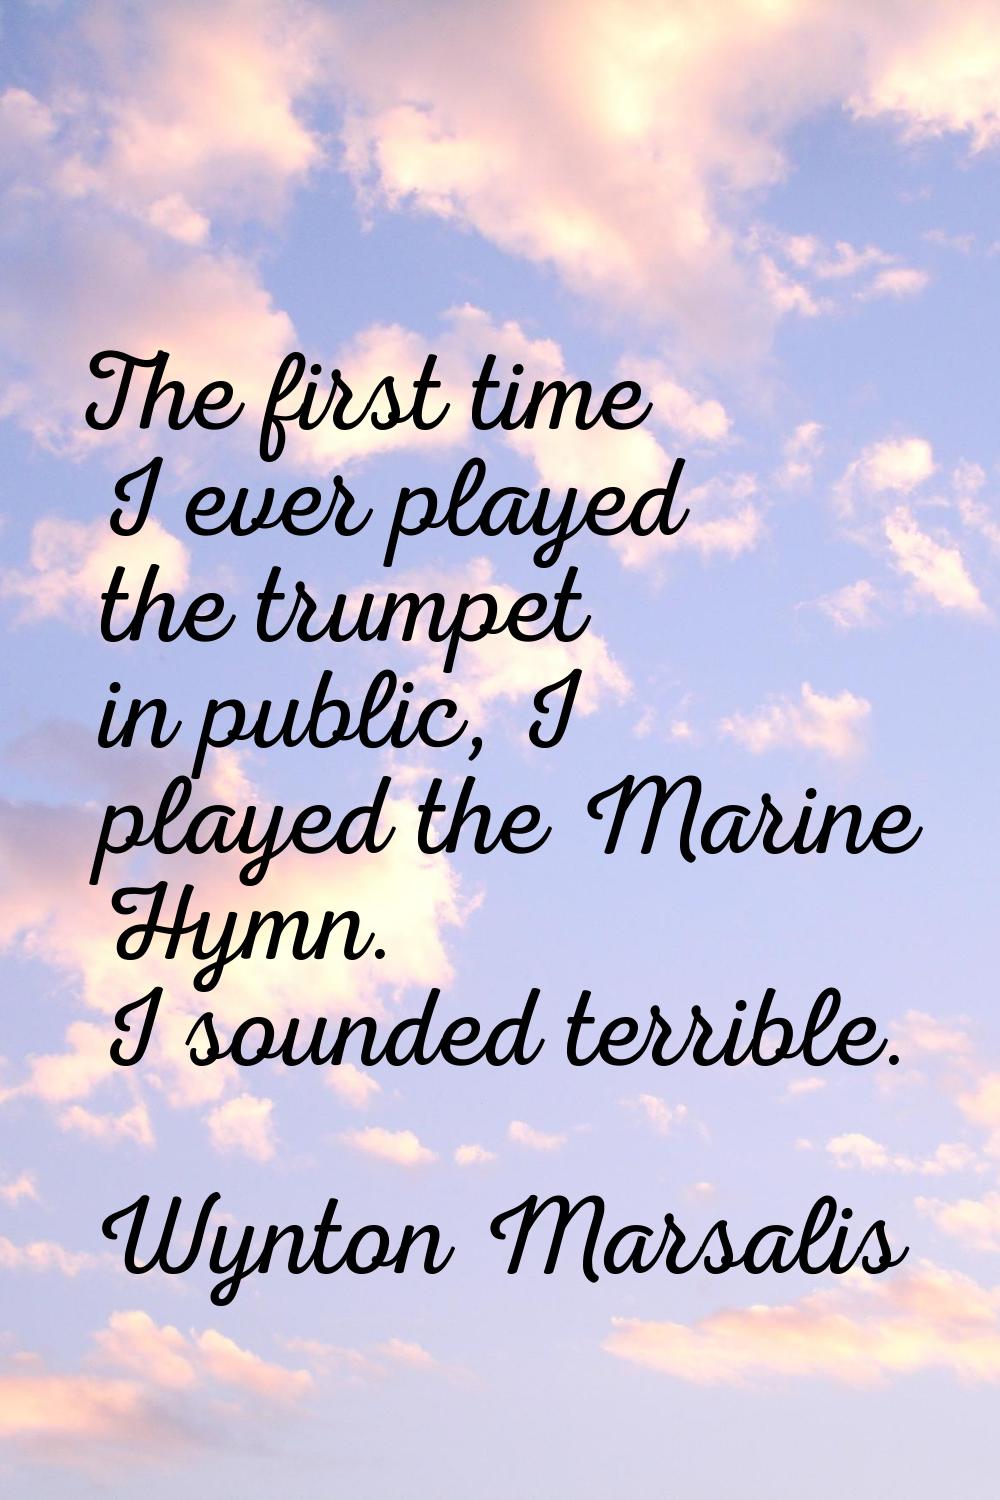 The first time I ever played the trumpet in public, I played the Marine Hymn. I sounded terrible.